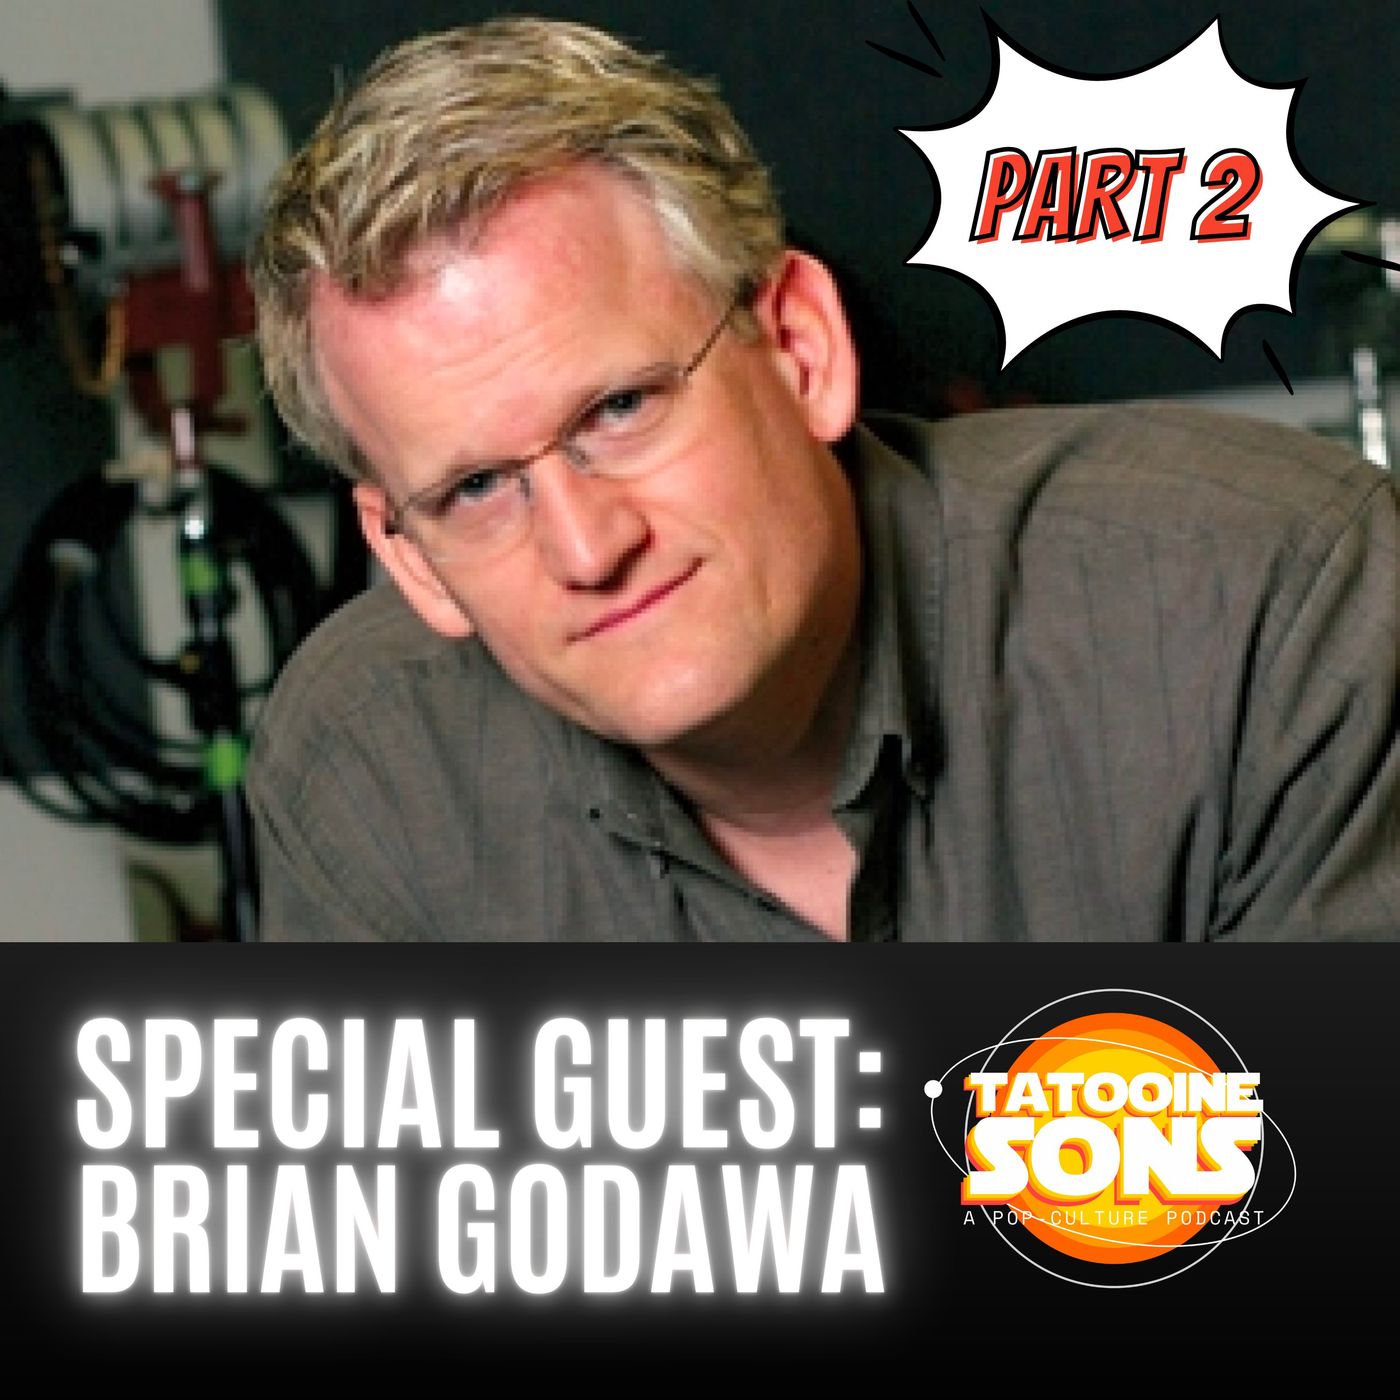 The Monomyth and a Supernatural Worldview: The Brian Godawa Interview Part 2